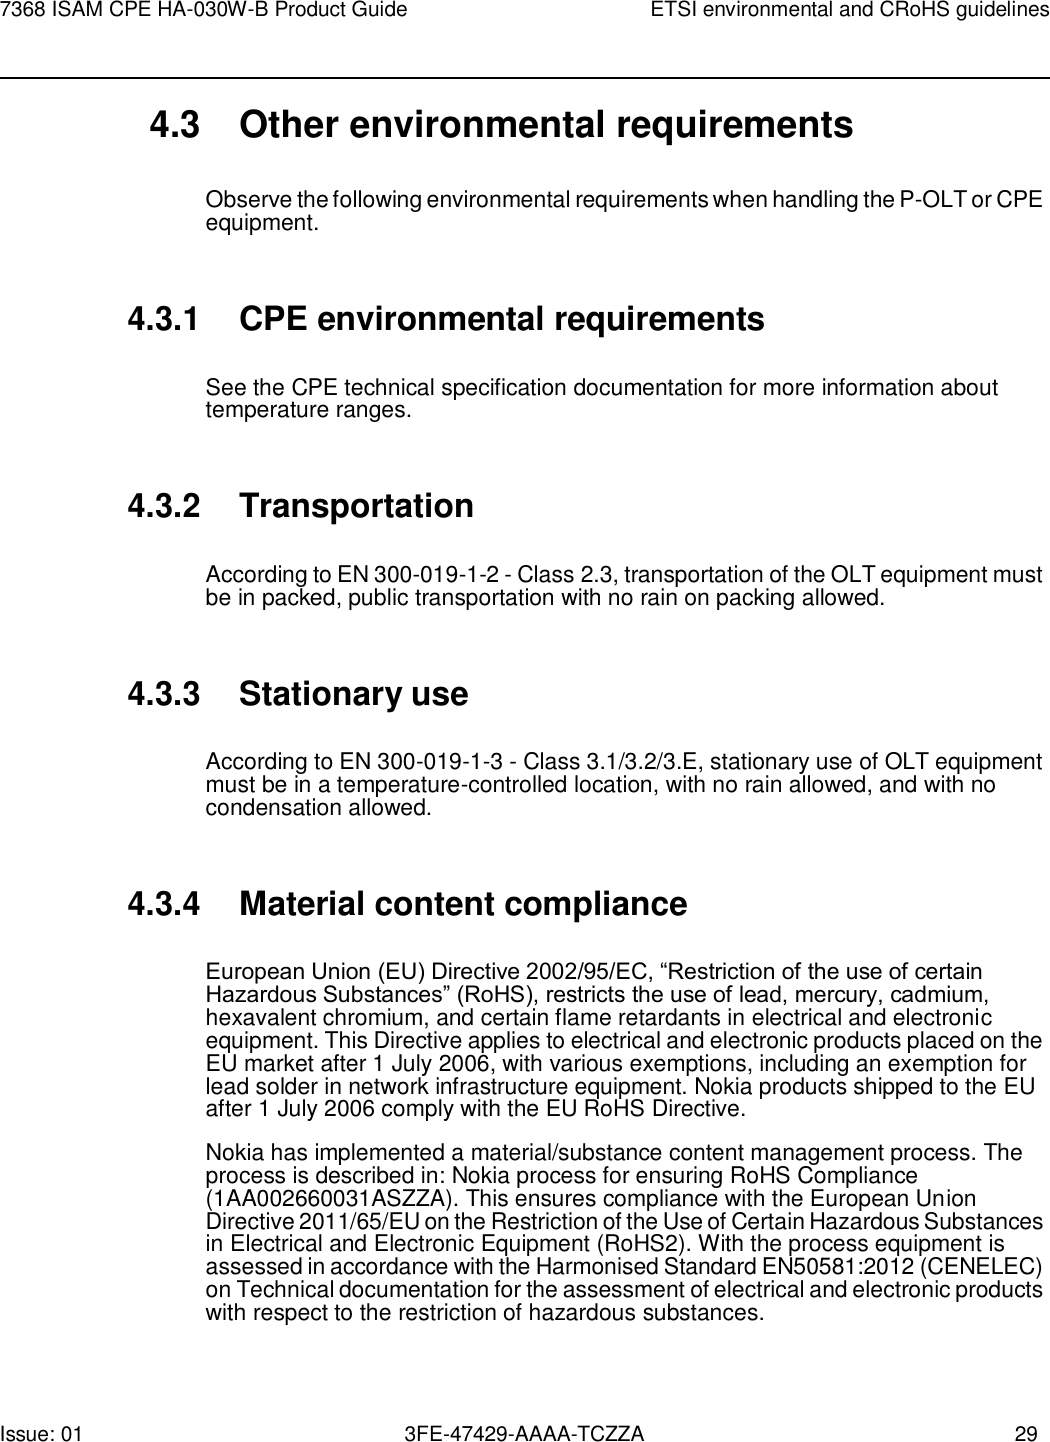 Issue: 01 3FE-47429-AAAA-TCZZA 29 7368 ISAM CPE HA-030W-B Product Guide ETSI environmental and CRoHS guidelines    4.3 Other environmental requirements  Observe the following environmental requirements when handling the P-OLT or CPE equipment.   4.3.1 CPE environmental requirements  See the CPE technical specification documentation for more information about temperature ranges.   4.3.2 Transportation  According to EN 300-019-1-2 - Class 2.3, transportation of the OLT equipment must be in packed, public transportation with no rain on packing allowed.   4.3.3 Stationary use  According to EN 300-019-1-3 - Class 3.1/3.2/3.E, stationary use of OLT equipment must be in a temperature-controlled location, with no rain allowed, and with no condensation allowed.   4.3.4 Material content compliance  European Union (EU) Directive 2002/95/EC, “Restriction of the use of certain Hazardous Substances” (RoHS), restricts the use of lead, mercury, cadmium, hexavalent chromium, and certain flame retardants in electrical and electronic equipment. This Directive applies to electrical and electronic products placed on the EU market after 1 July 2006, with various exemptions, including an exemption for lead solder in network infrastructure equipment. Nokia products shipped to the EU after 1 July 2006 comply with the EU RoHS Directive. Nokia has implemented a material/substance content management process. The process is described in: Nokia process for ensuring RoHS Compliance (1AA002660031ASZZA). This ensures compliance with the European Union Directive 2011/65/EU on the Restriction of the Use of Certain Hazardous Substances in Electrical and Electronic Equipment (RoHS2). With the process equipment is assessed in accordance with the Harmonised Standard EN50581:2012 (CENELEC) on Technical documentation for the assessment of electrical and electronic products with respect to the restriction of hazardous substances. 